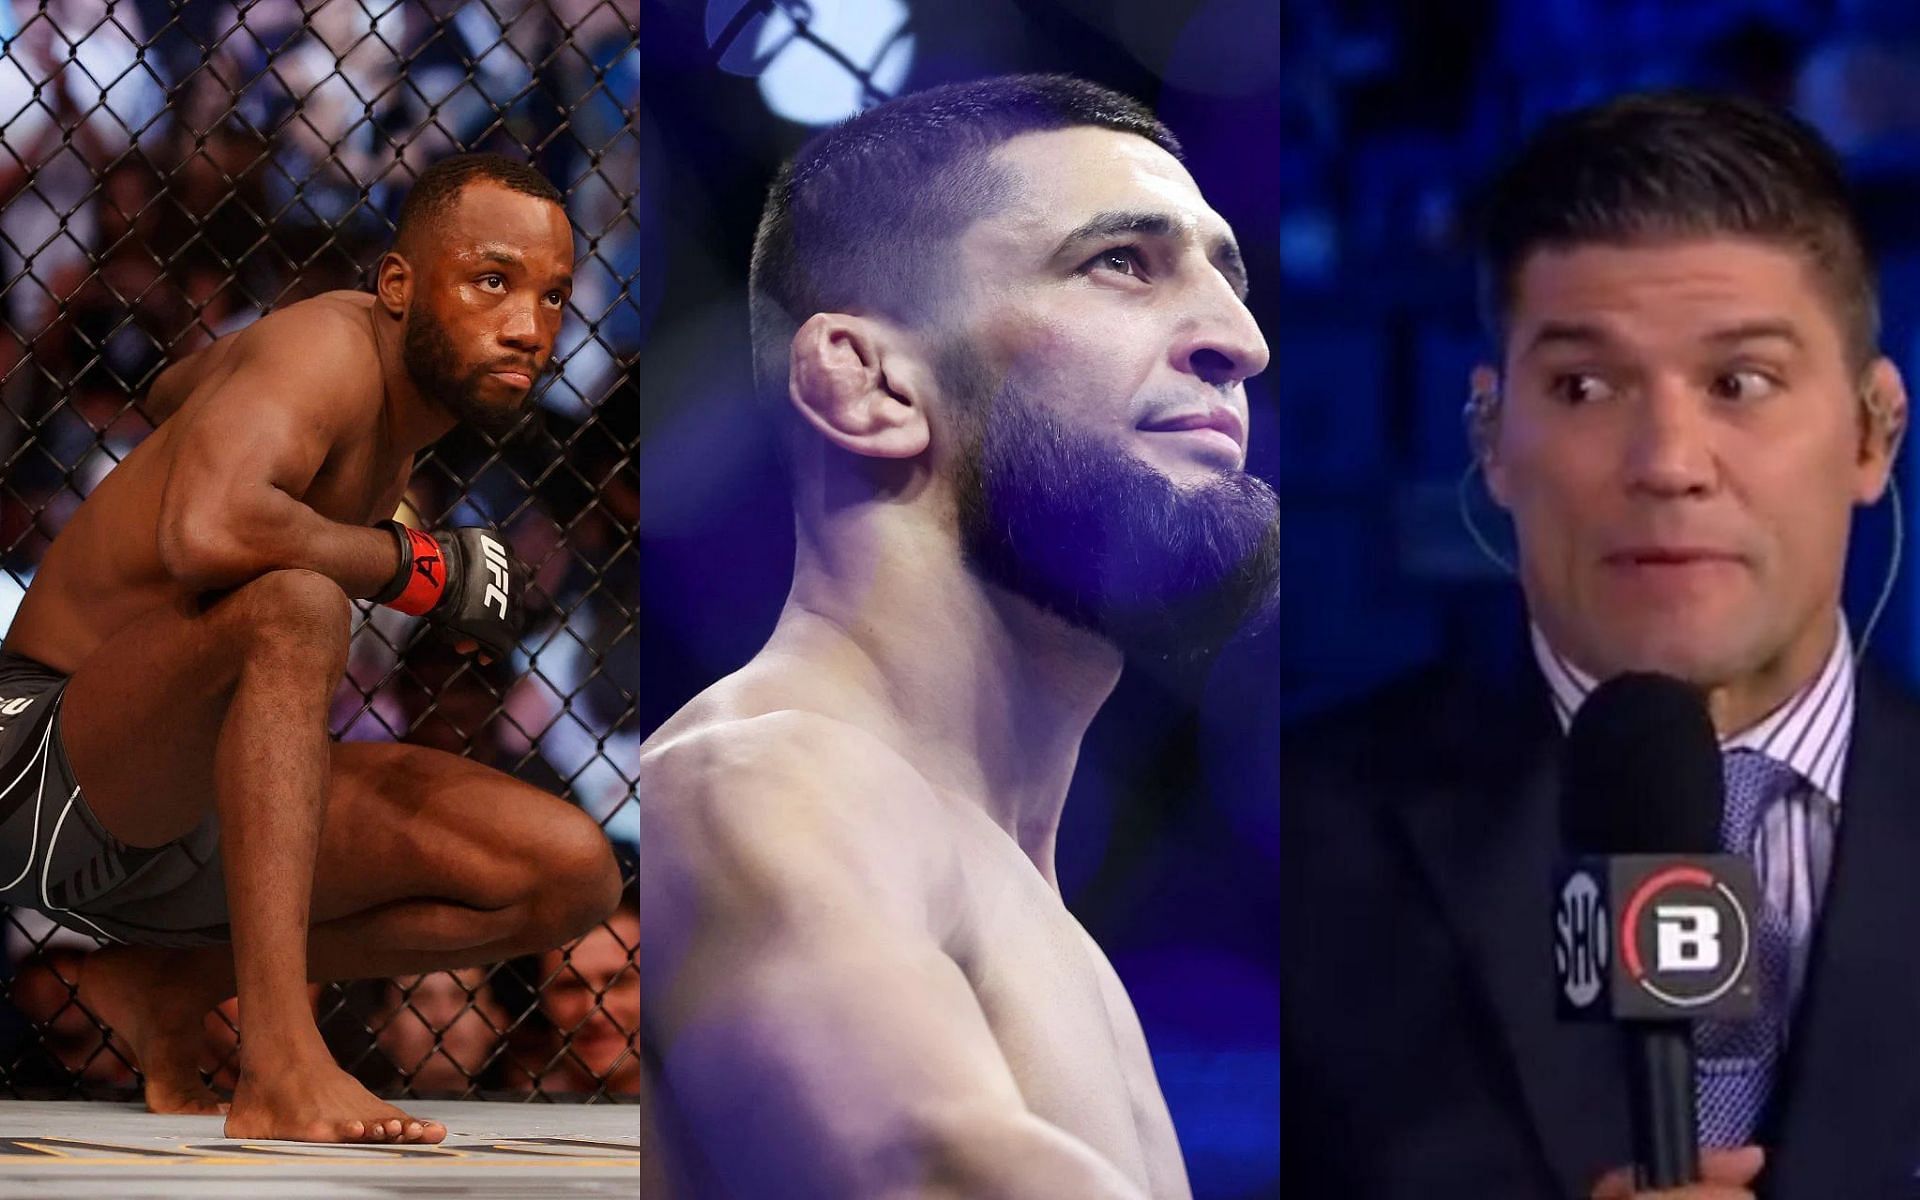 Leon Edwards (Left), Khamzat Chimaev (Middle) and Josh Thomson (Right) (Images courtesy of Getty and @therealpunk Instagram)